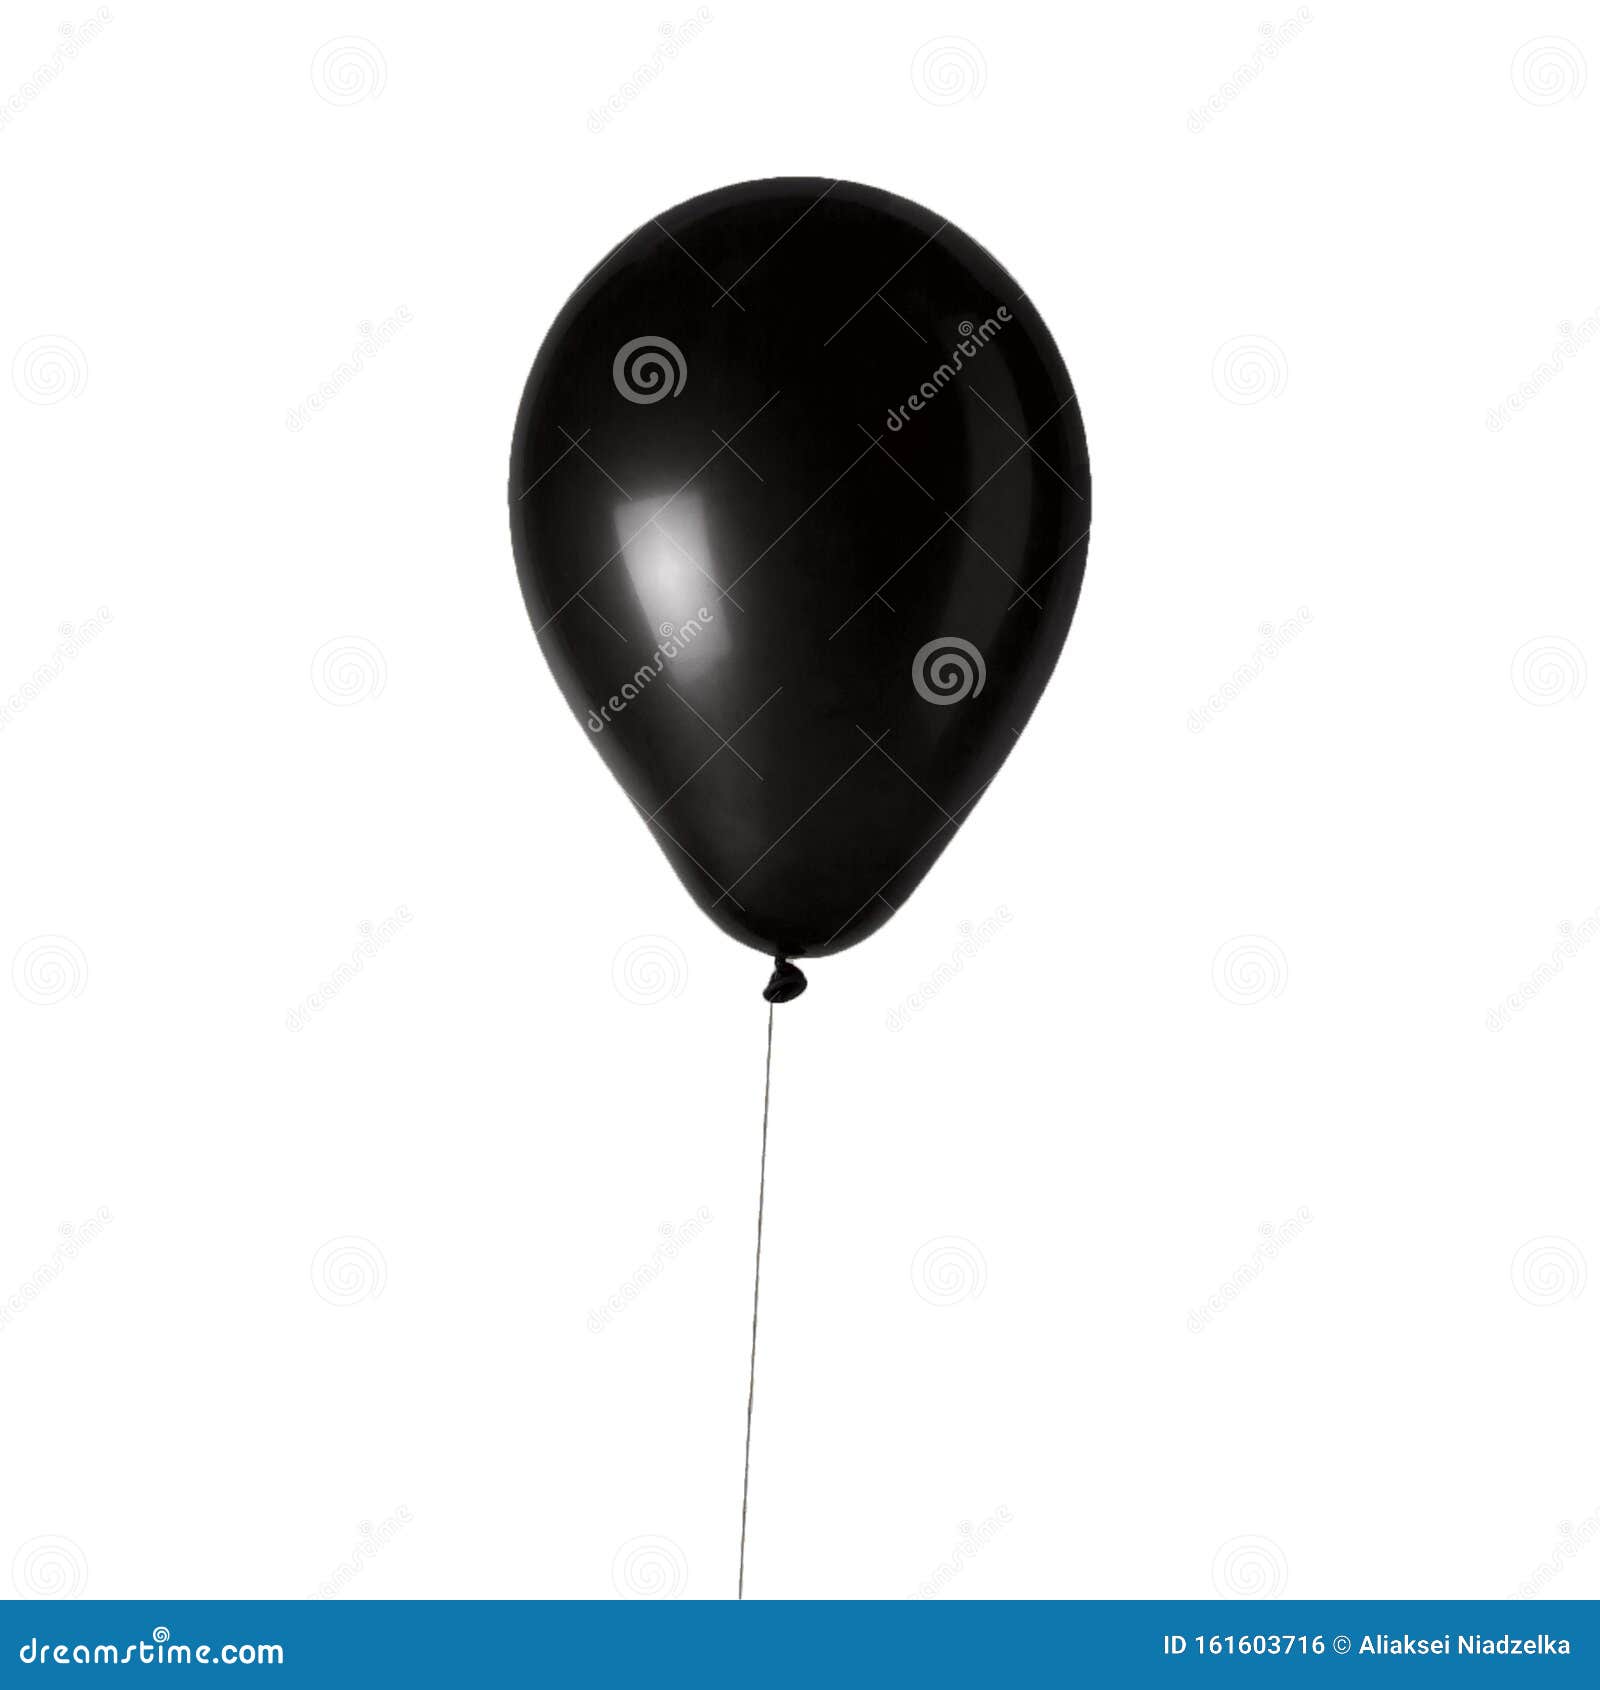 Download Hand Hold Blank Black Balloon Mock Up Isolated Balloon With Black Ribbon Art Design Mockup Holding In Hand Dark Balon Stock Photo Image Of Flying Display 161603716